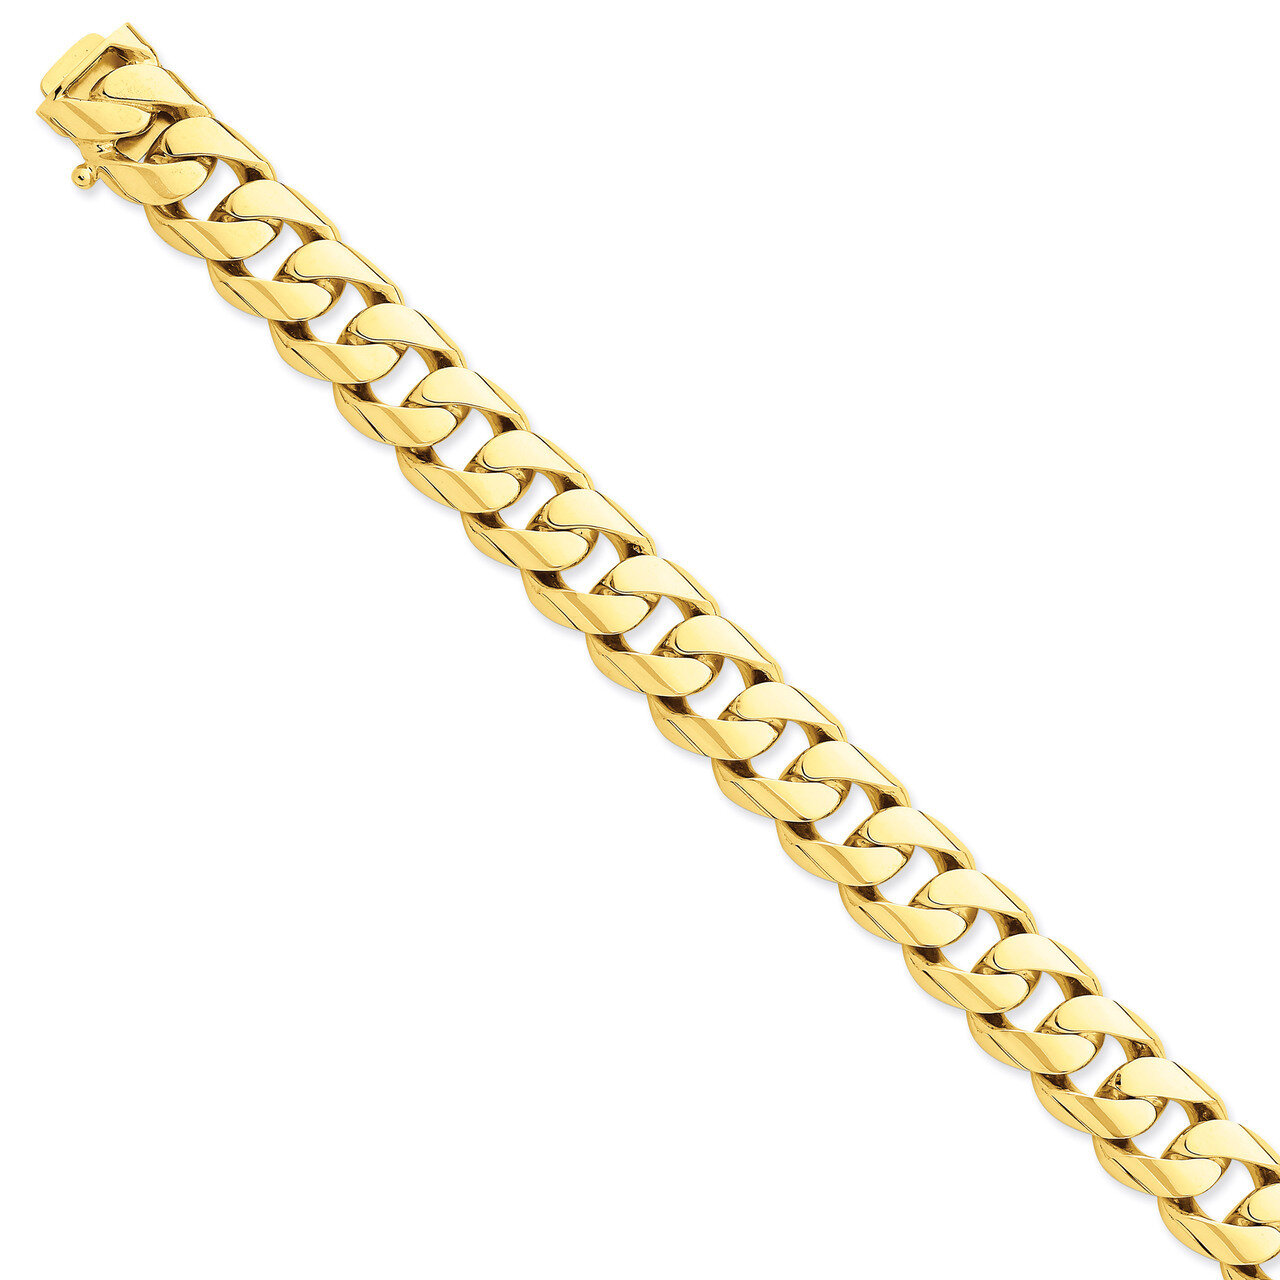 13mm Hand-polished Rounded Curb Chain 24 Inch 14k Gold LK128-24